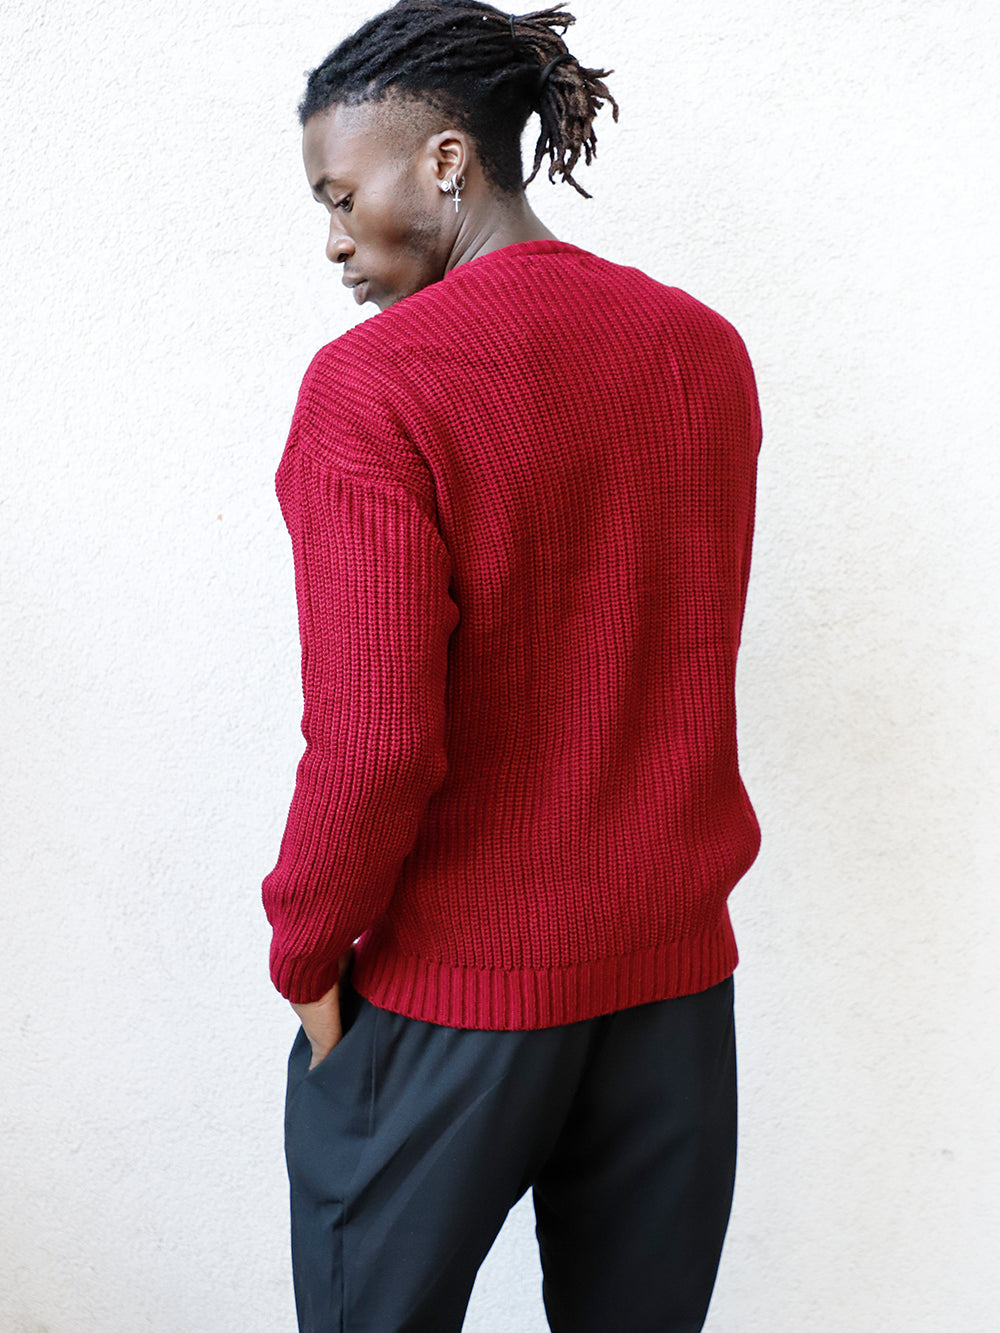 A man wearing the DISTRESSED GENTLEMAN SWEATER | BURGUNDY and black pants.